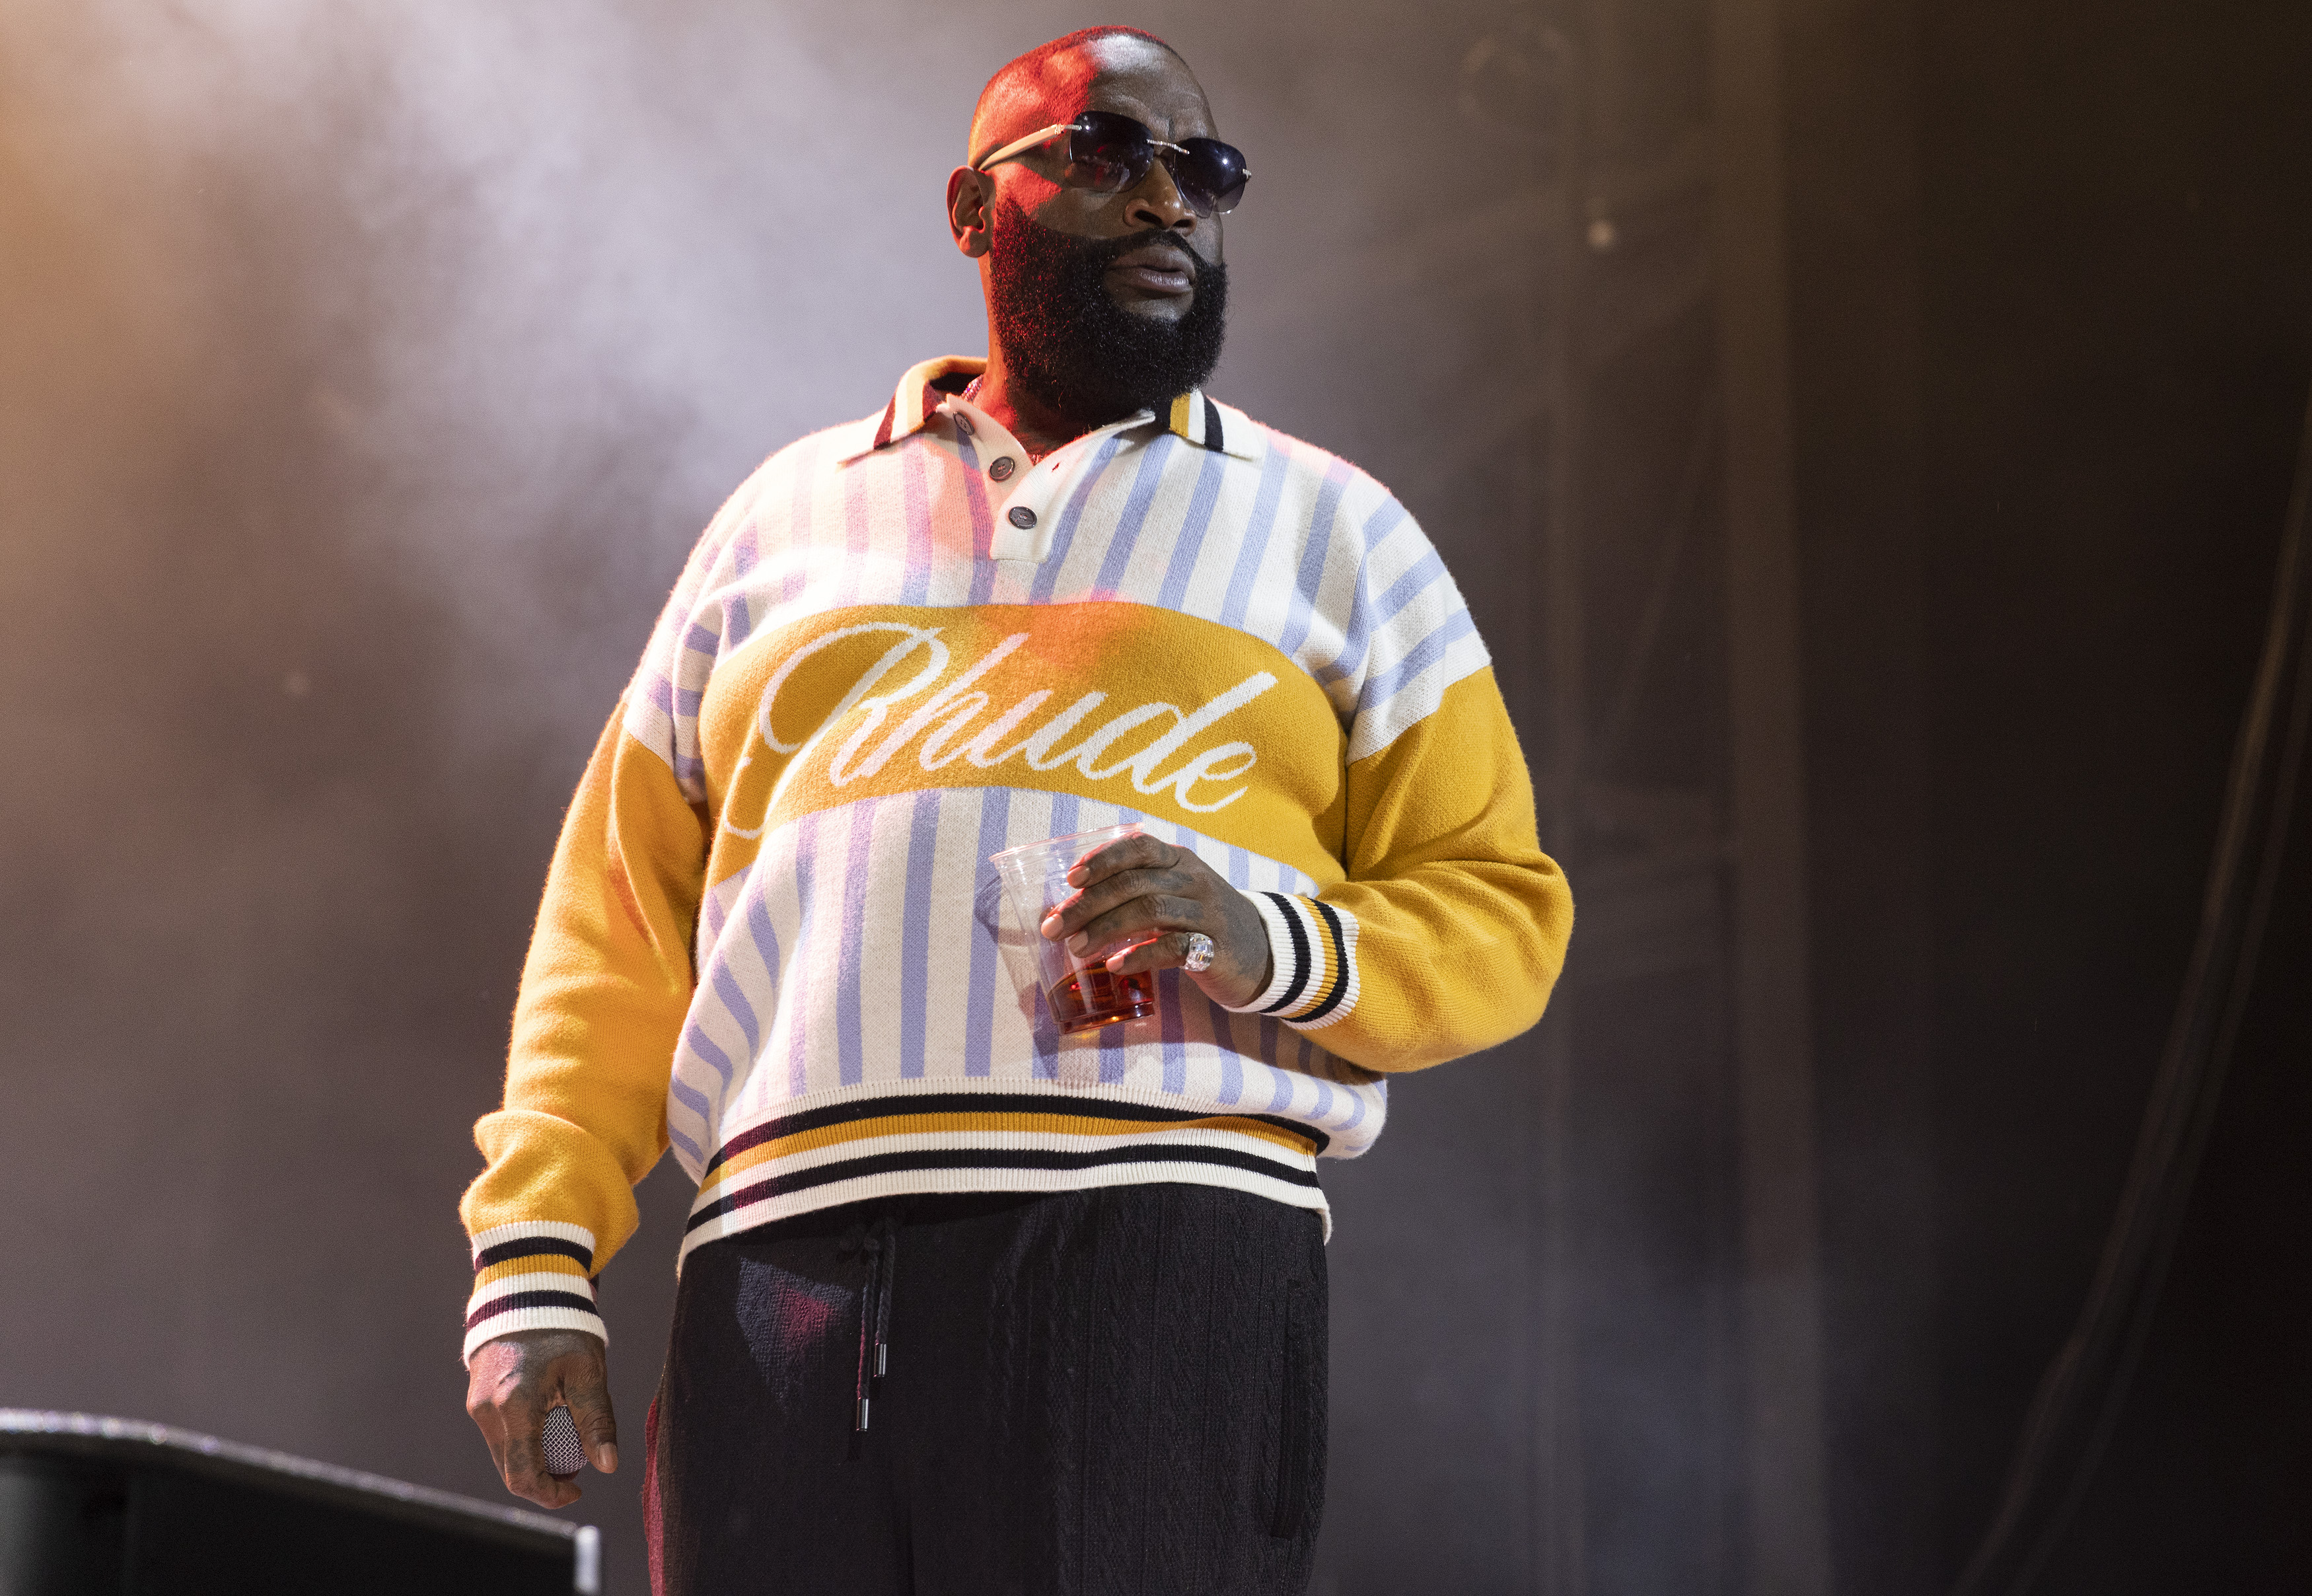 Rick Ross Reacts To Officials Denying Car & Bike Show Event Permit: “It Must Go On”